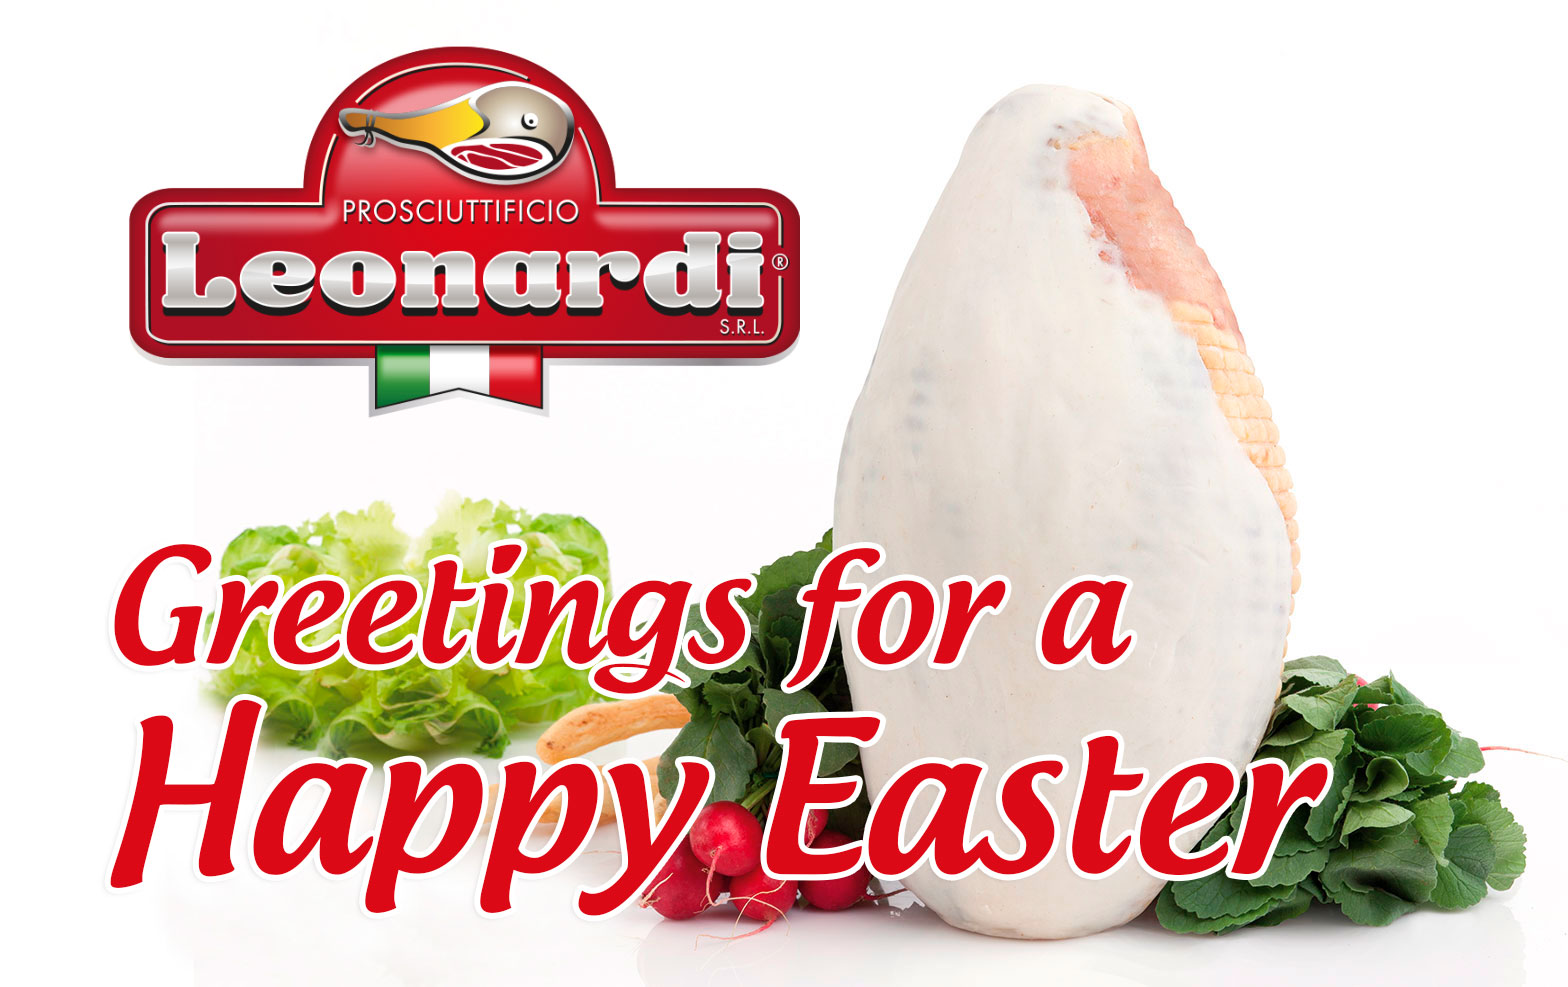 Greetings for a Happy Easter